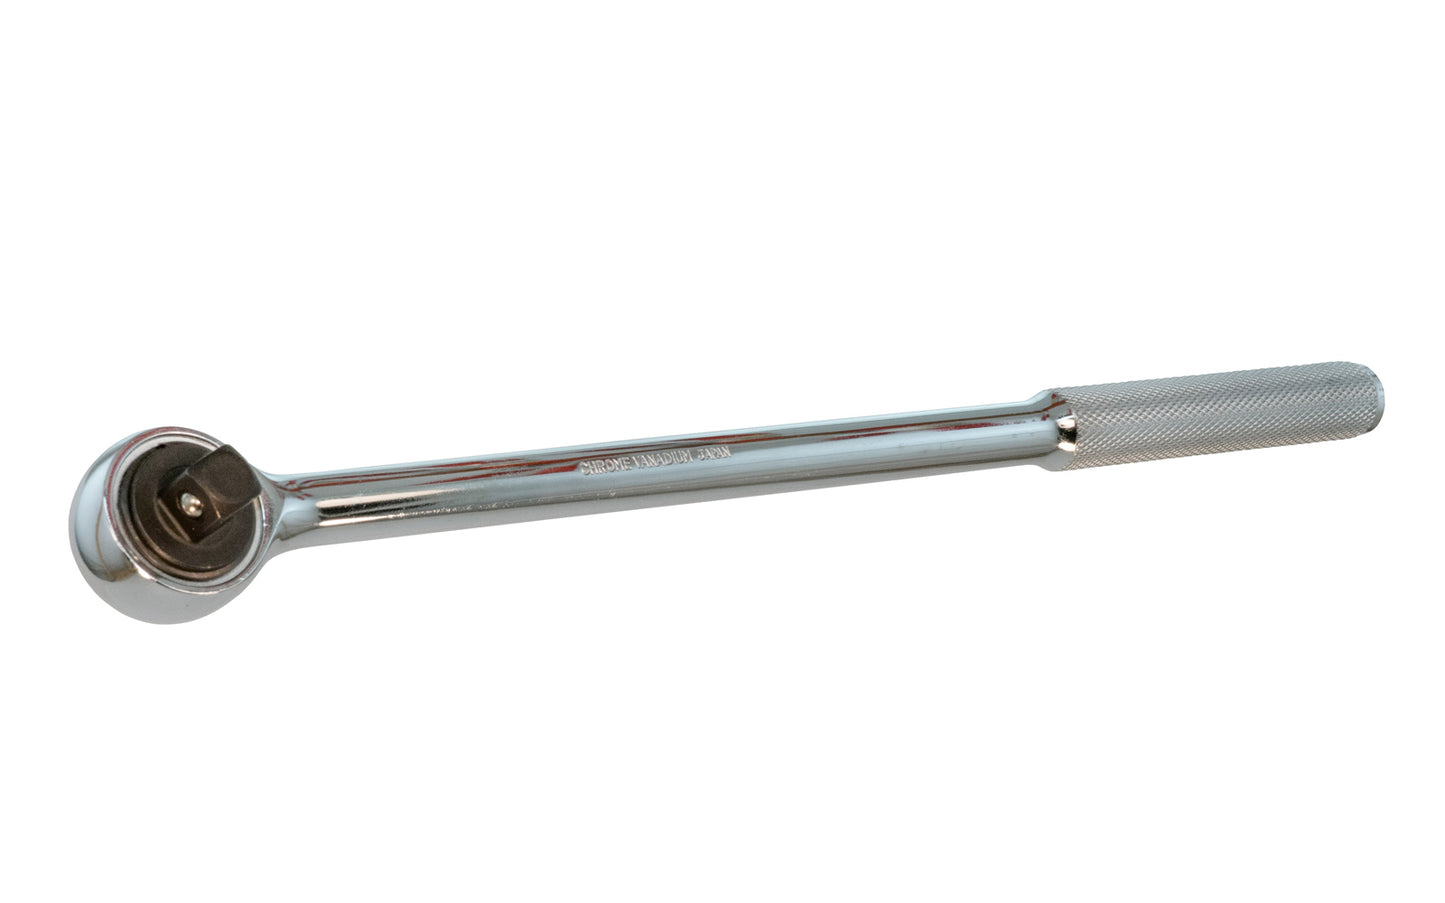 This 15" Ratchet Handle 1/2" Dr. is made of Chrome Vanadium Steel with an etched steel handle for a good grip. Easy change reversible ratchet direction. 15" overall length. 1/2" drive.  Japanese Ratchet Handle.   Made in Japan.